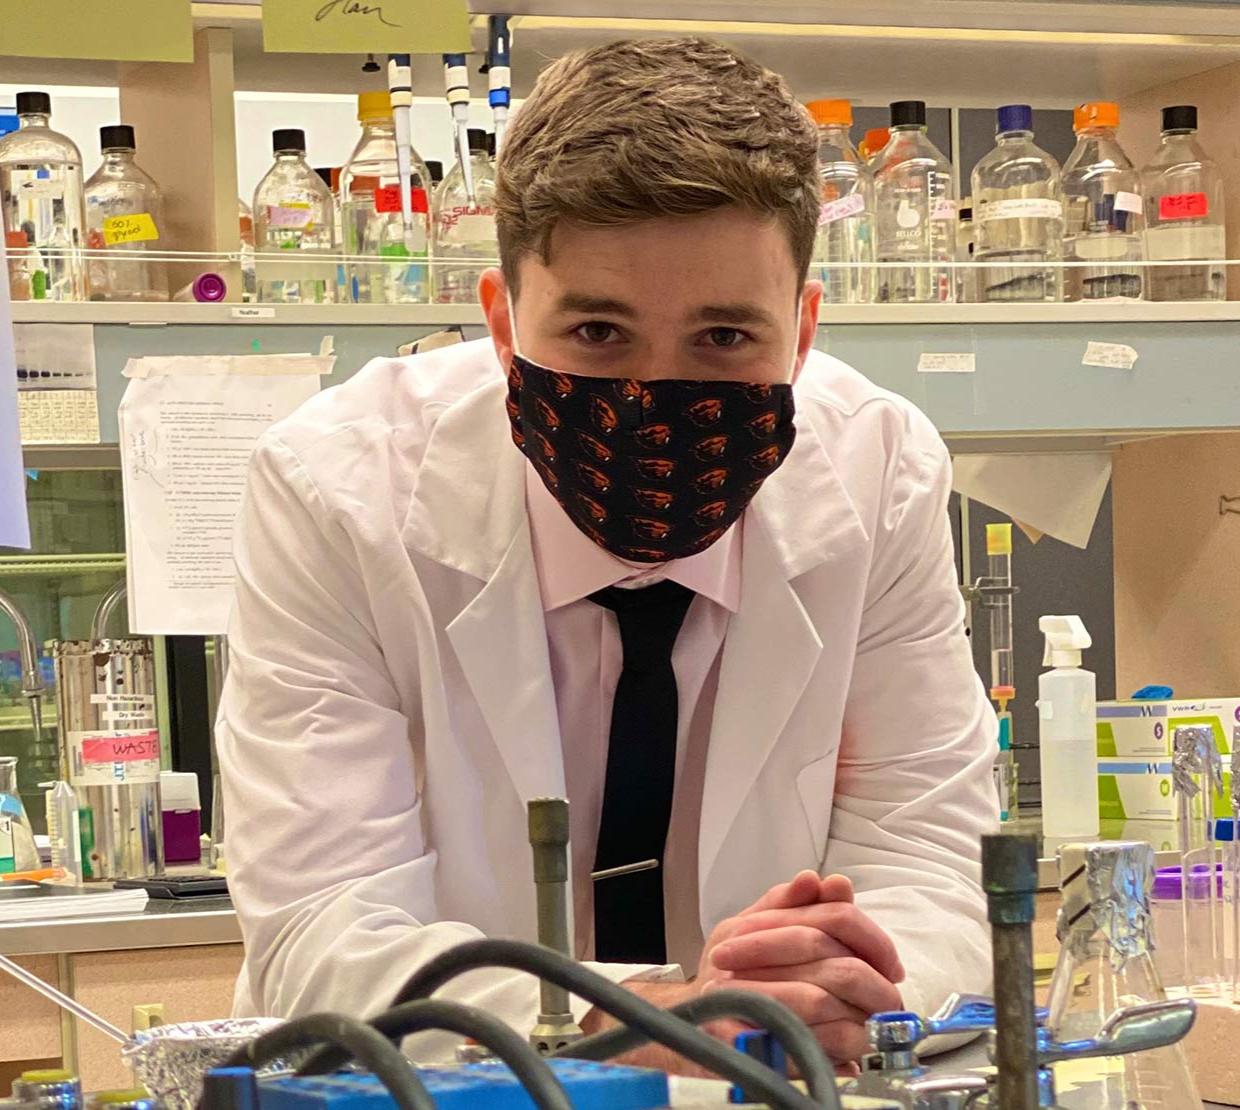 A young man in a lab coat and face mask leaning over a counter with test tubs